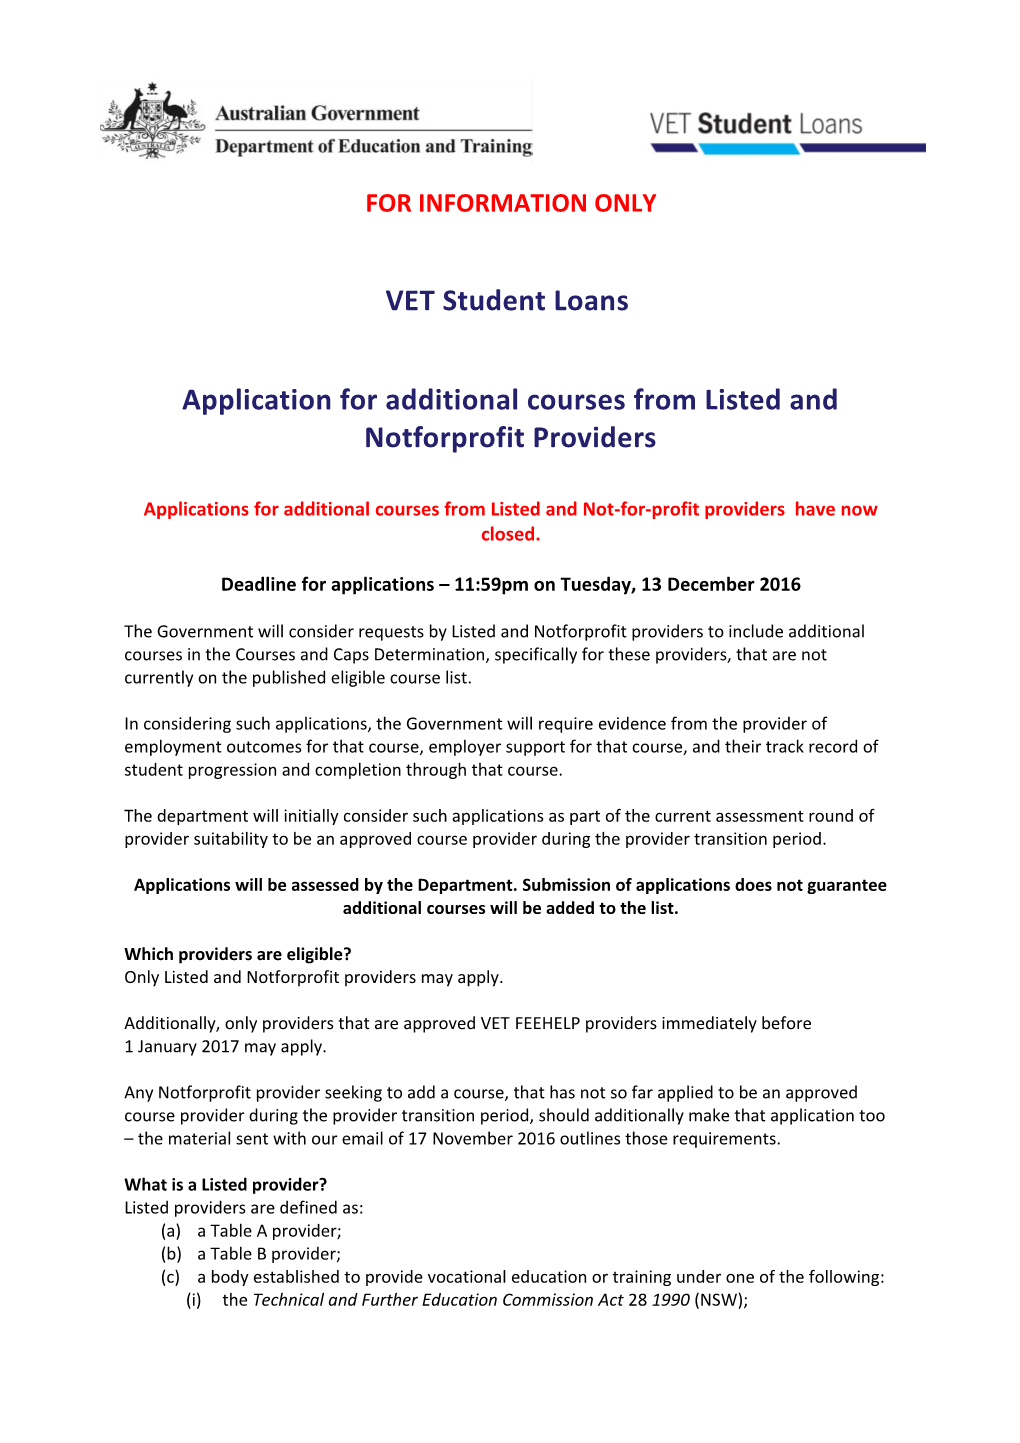 Application for Additional Courses from Listed and Notforprofit Providers